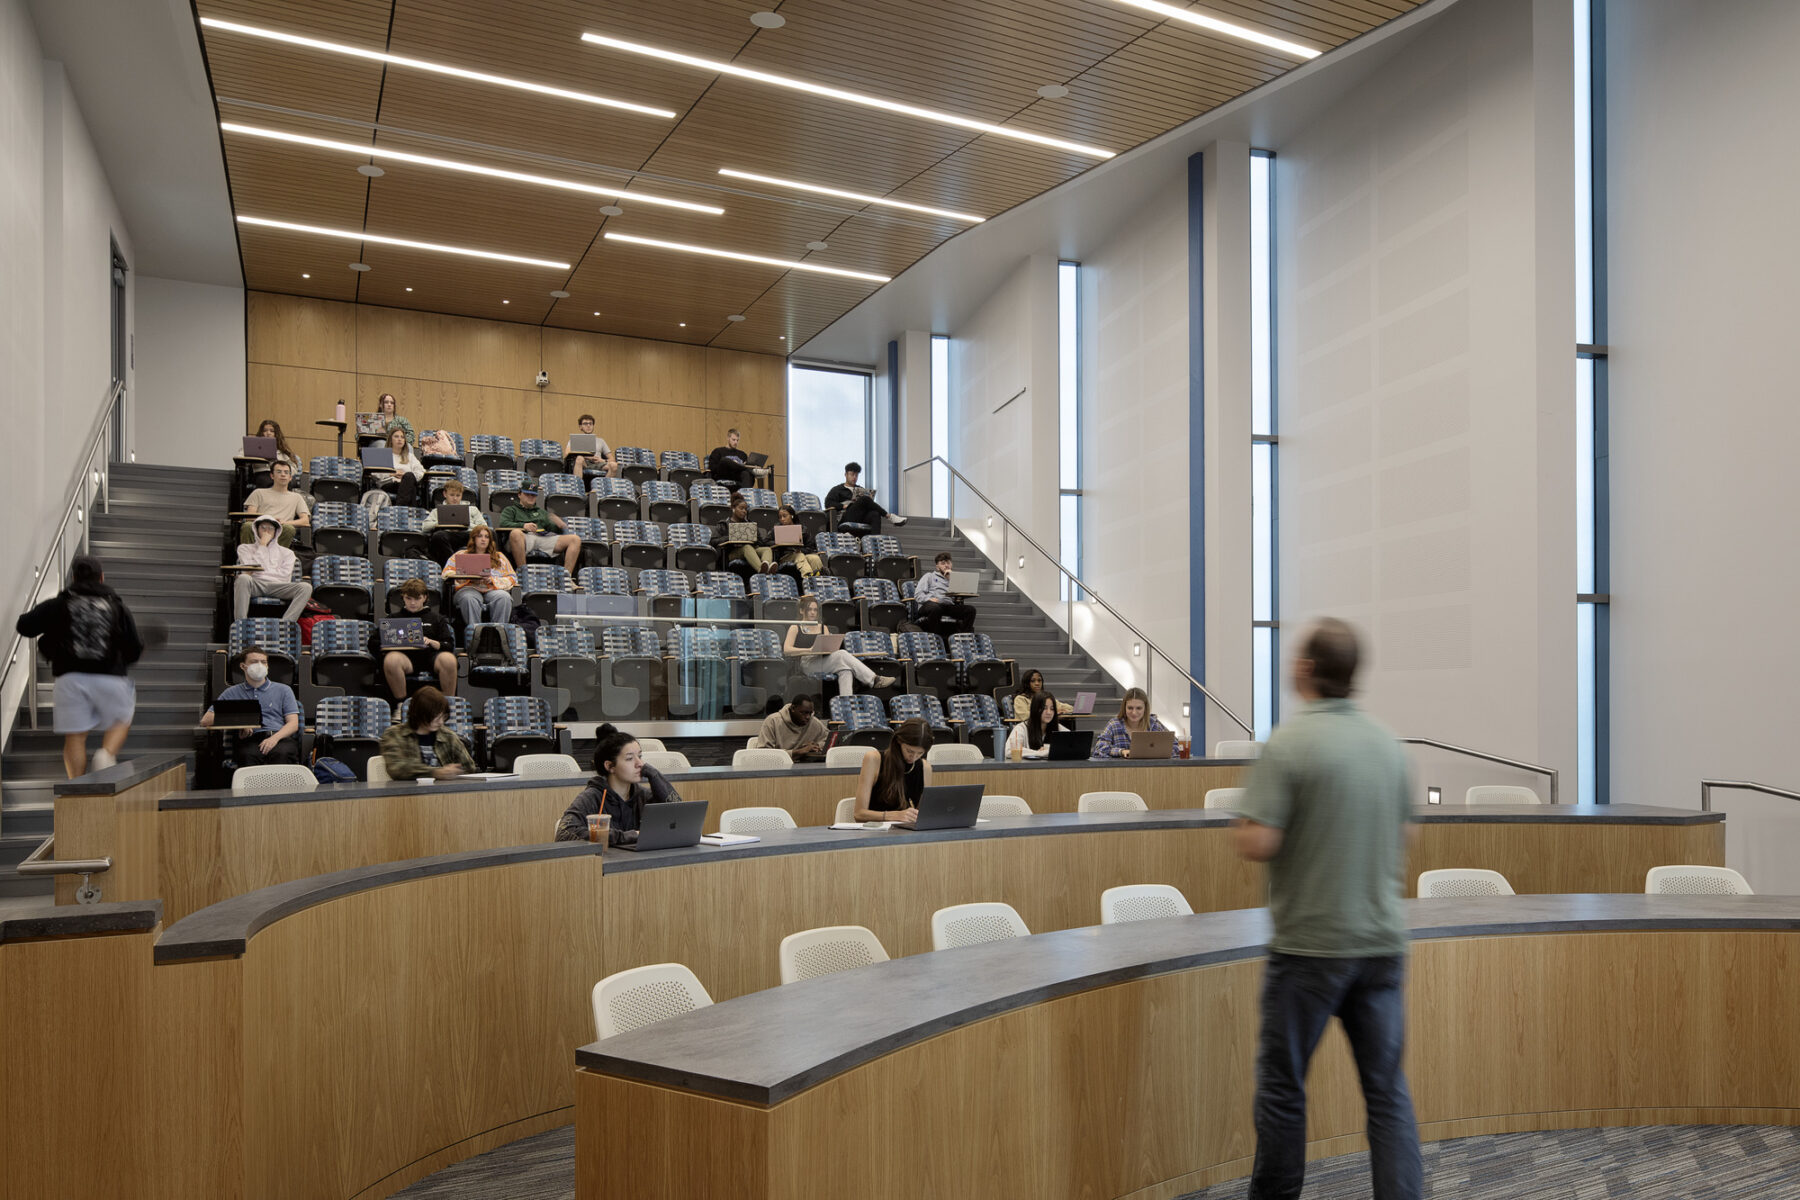 Photo looking up into the double height auditorium with professor teaching in the foreground and students seated and facing forwards